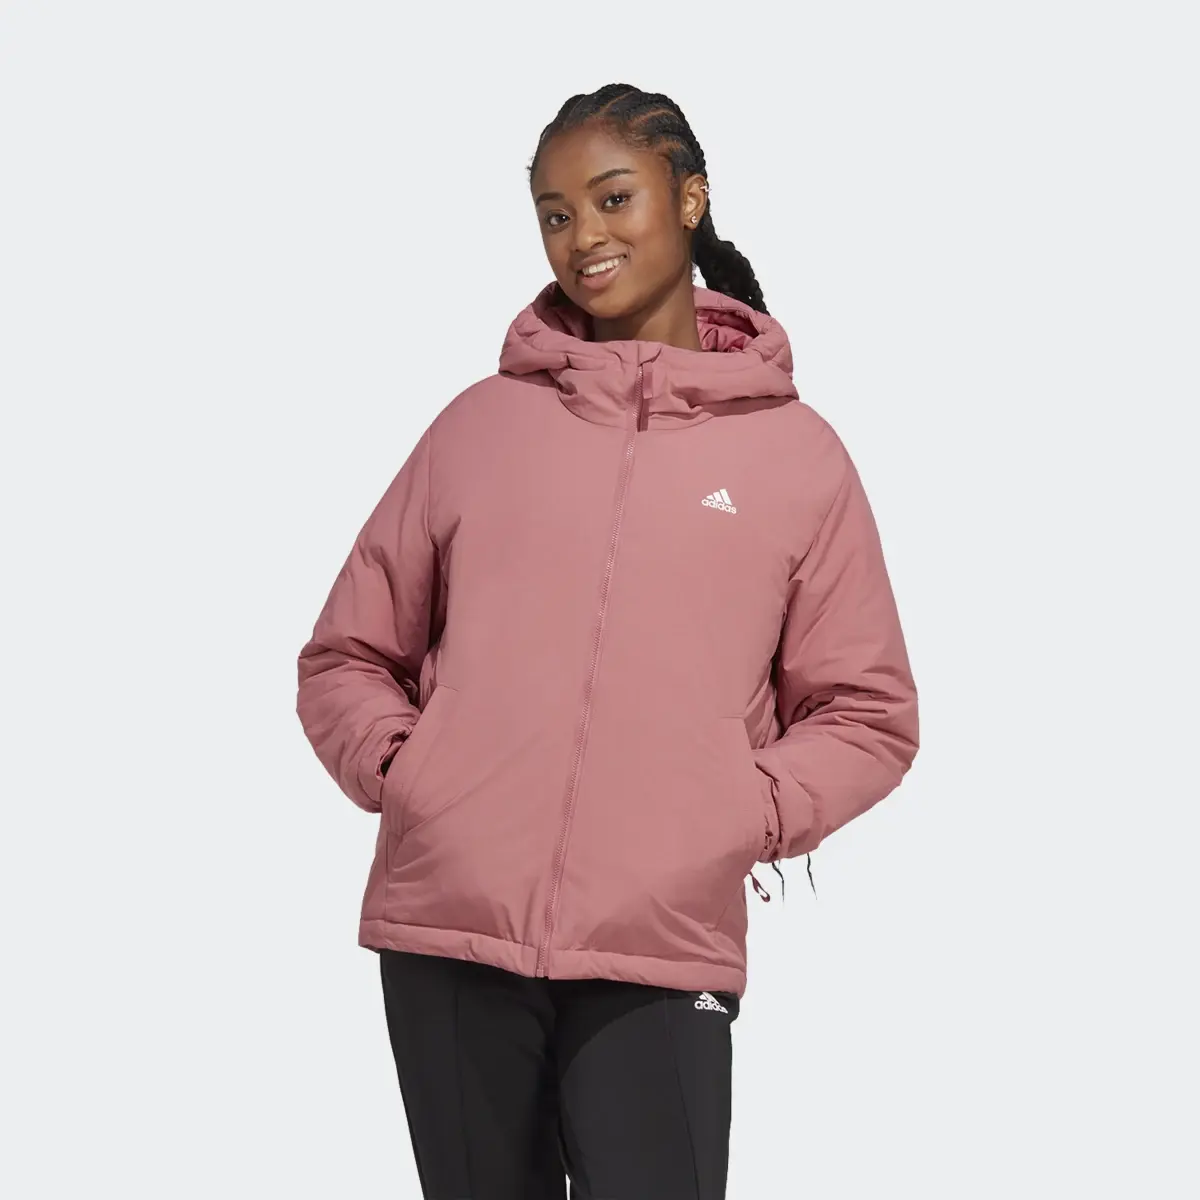 Adidas BSC Sturdy Insulated Hooded Jacket. 2